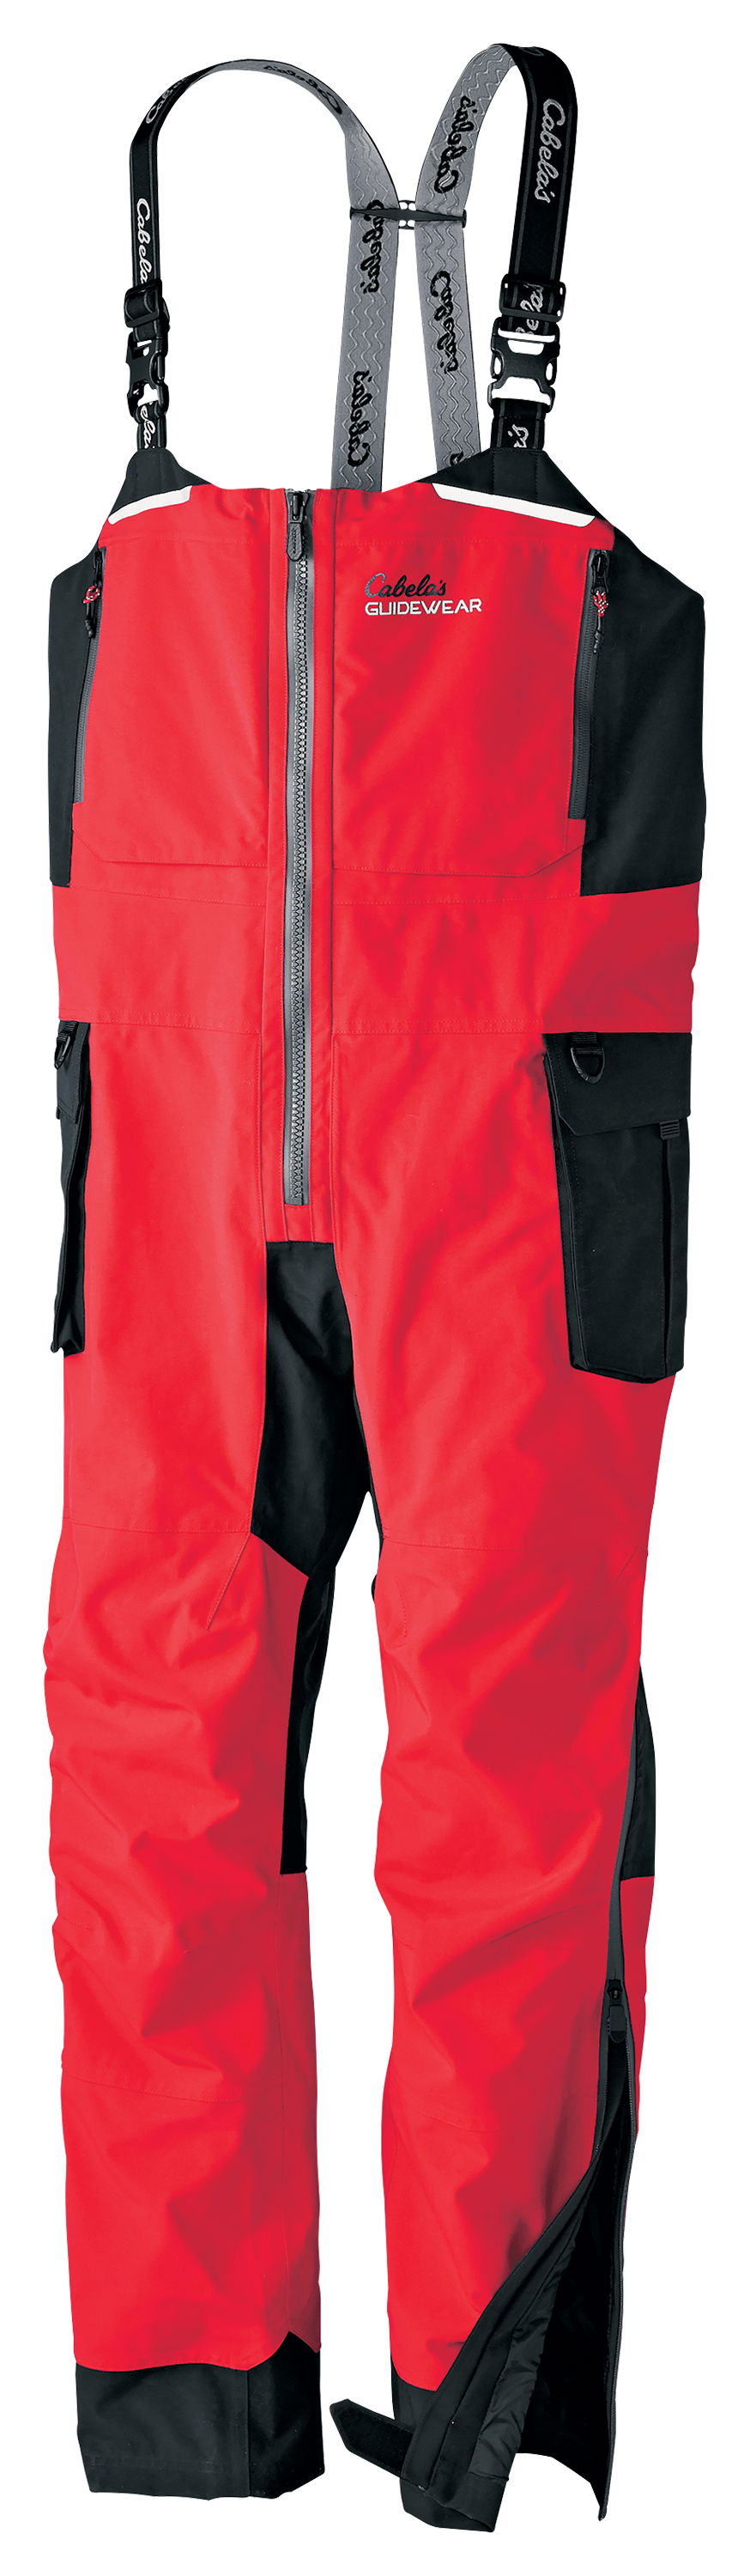 Guidewear Xtreme Bibs with GORE-TEX for Men